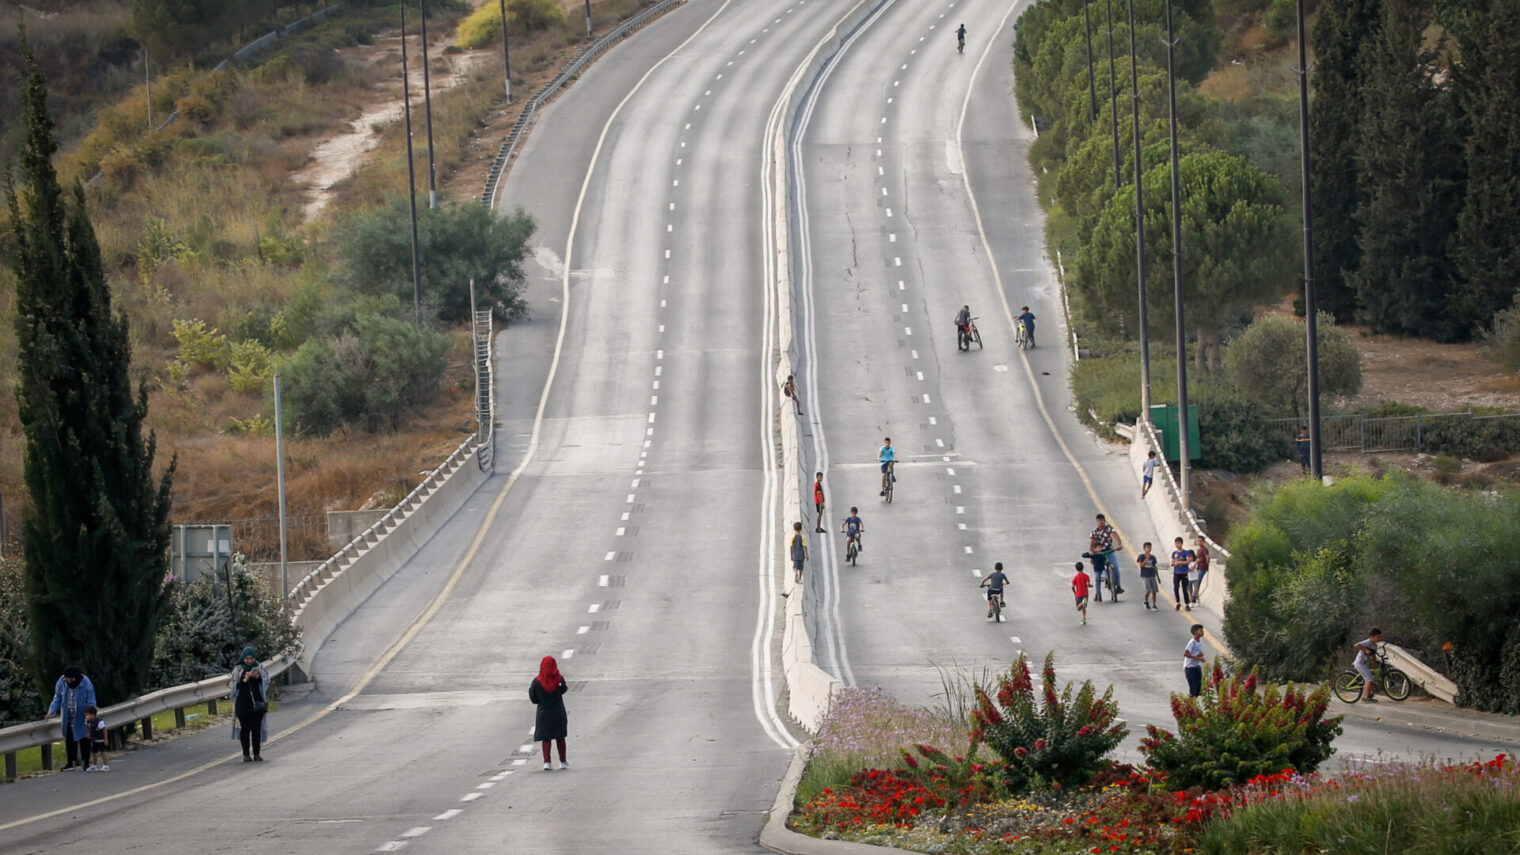 Children ride their bicycles along the empty Jerusalem roads on Yom Kippur, the Day of Atonement, and the holiest of Jewish holidays. Photo by Jamal Awad/Flash 90Â 